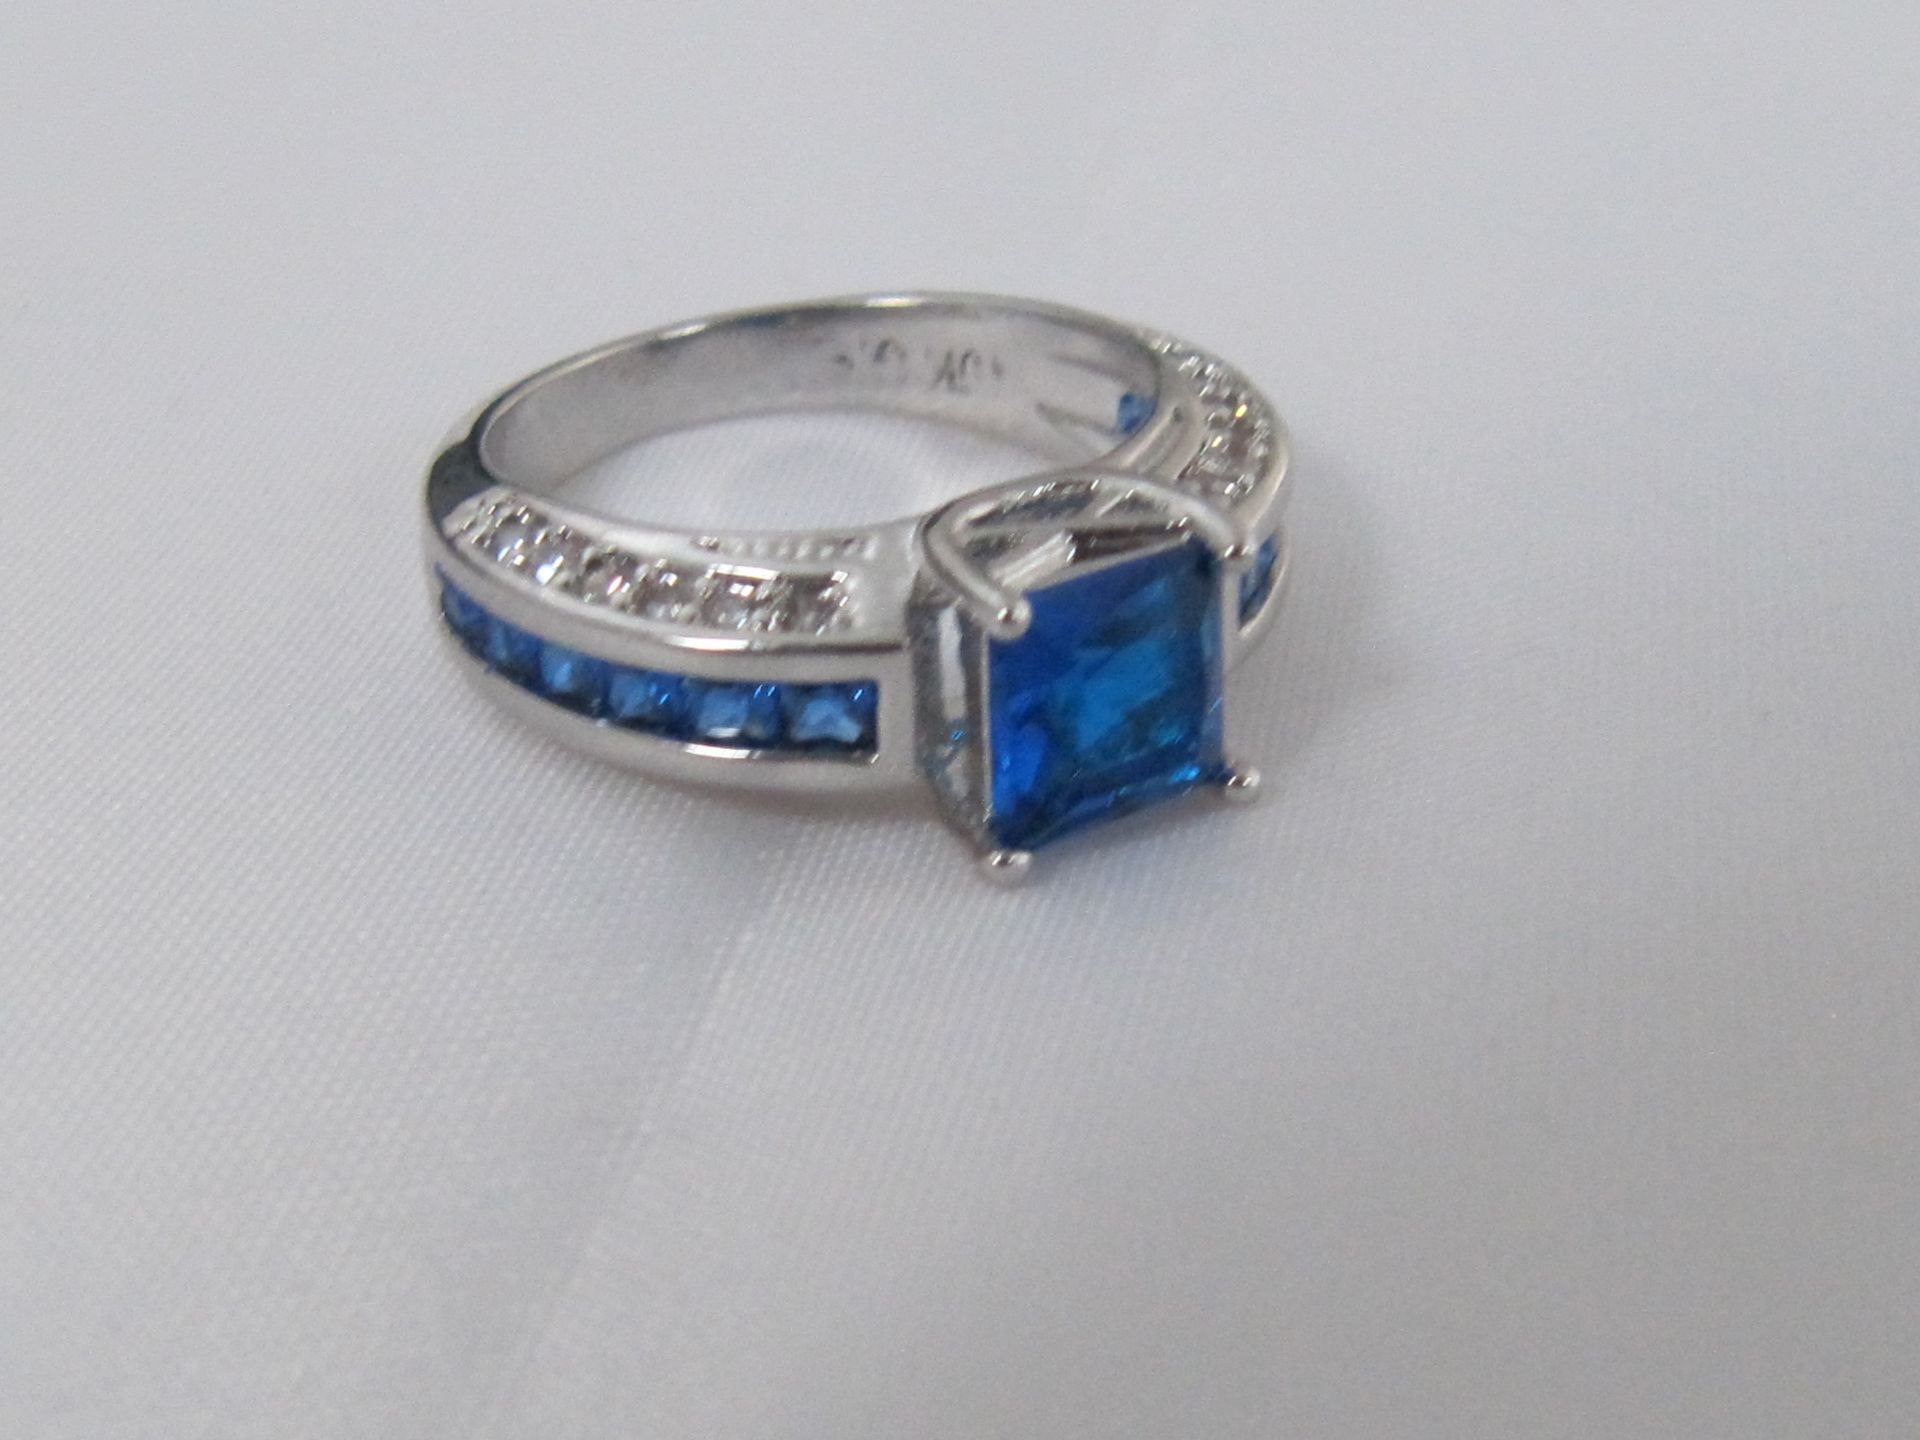 10k White Gold Filled with Blue Sapphires. Size Q. - Image 5 of 5